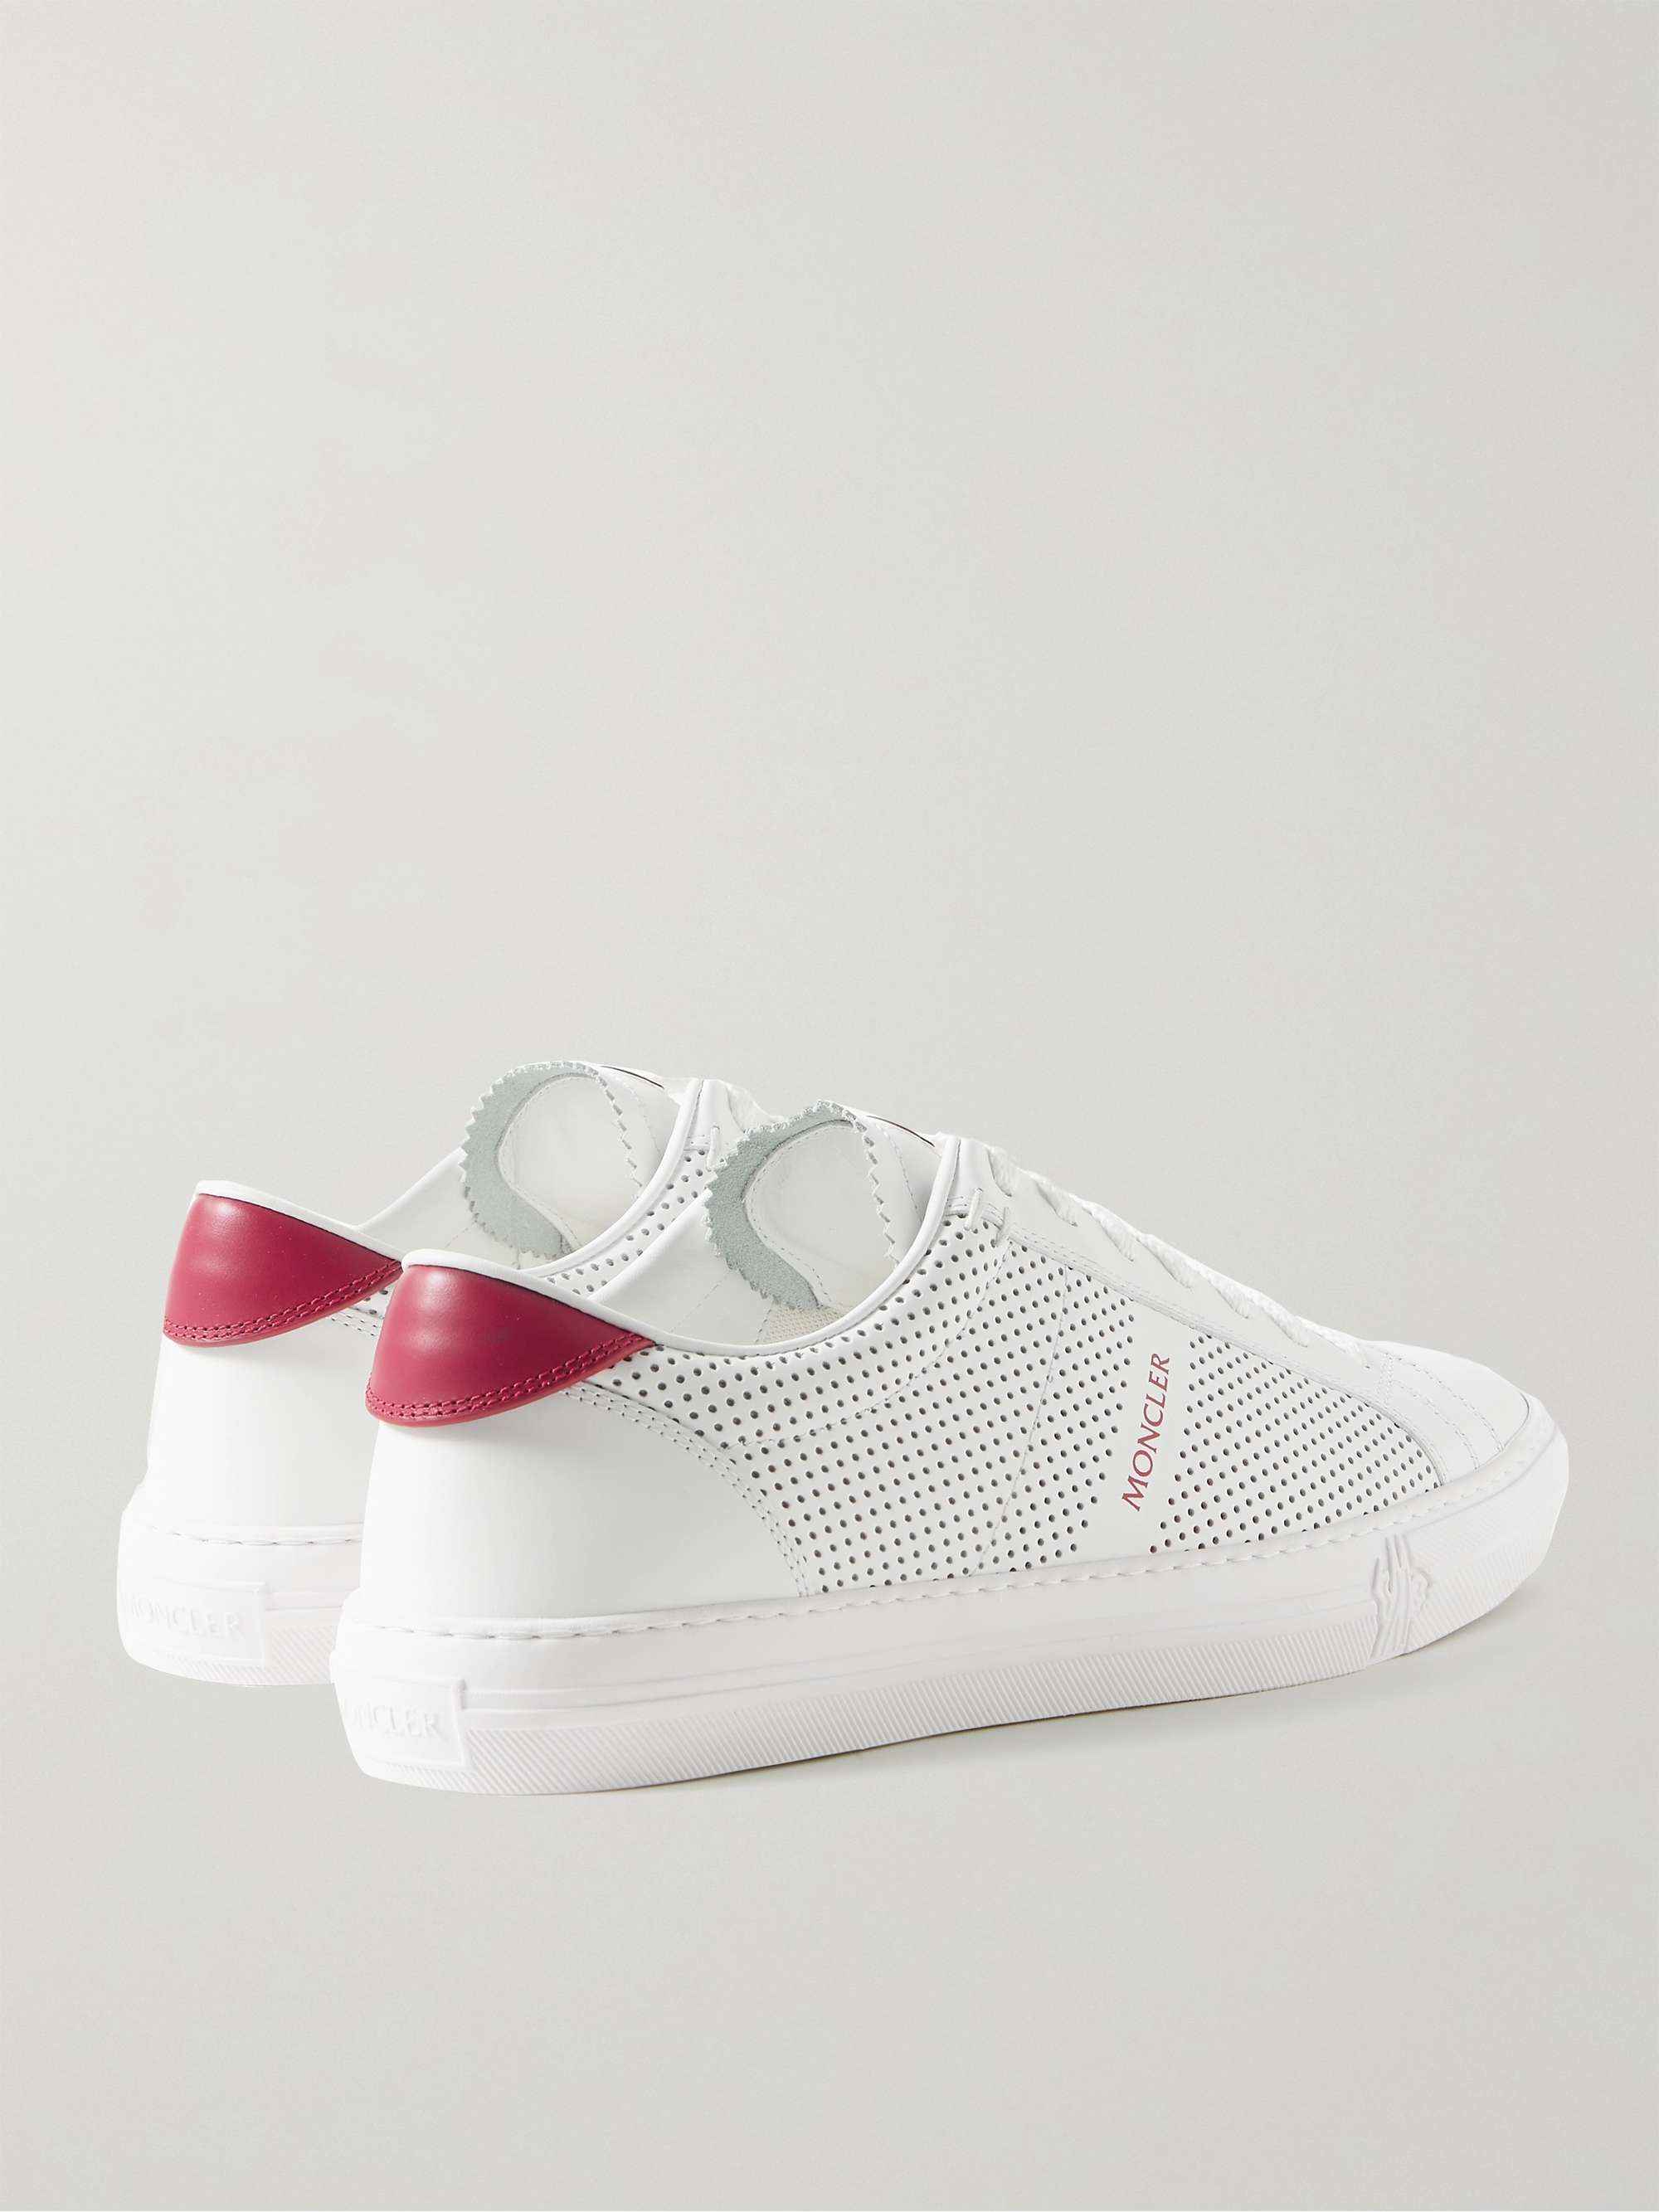 New Monaco Perforated Leather Sneakers